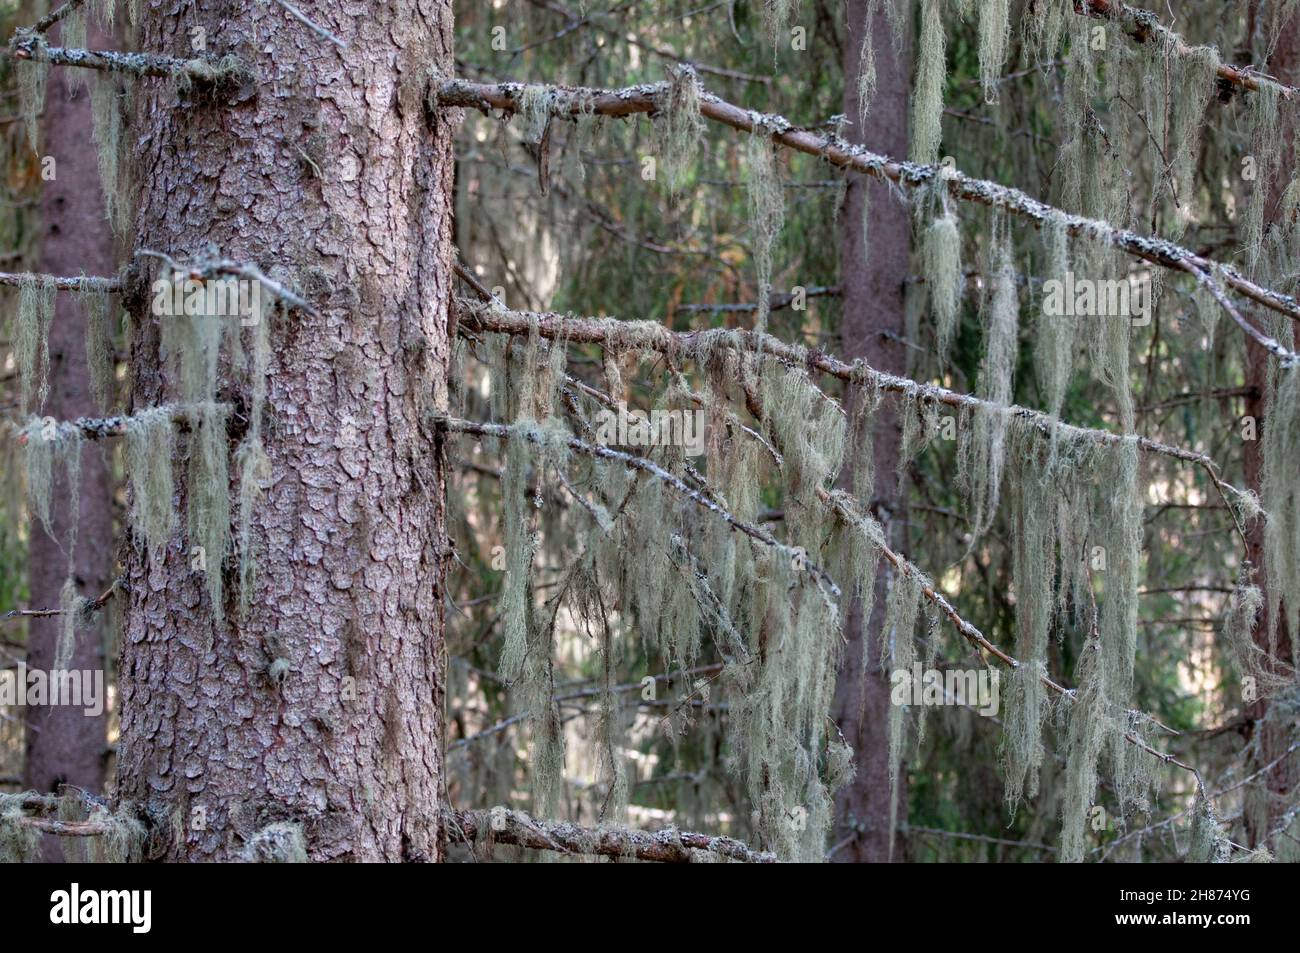 Spanish moss (from the Bromeliaceae family) draped over pine tree branches. This plant uses trees or rocks for support. It does not harm the tree, so Stock Photo